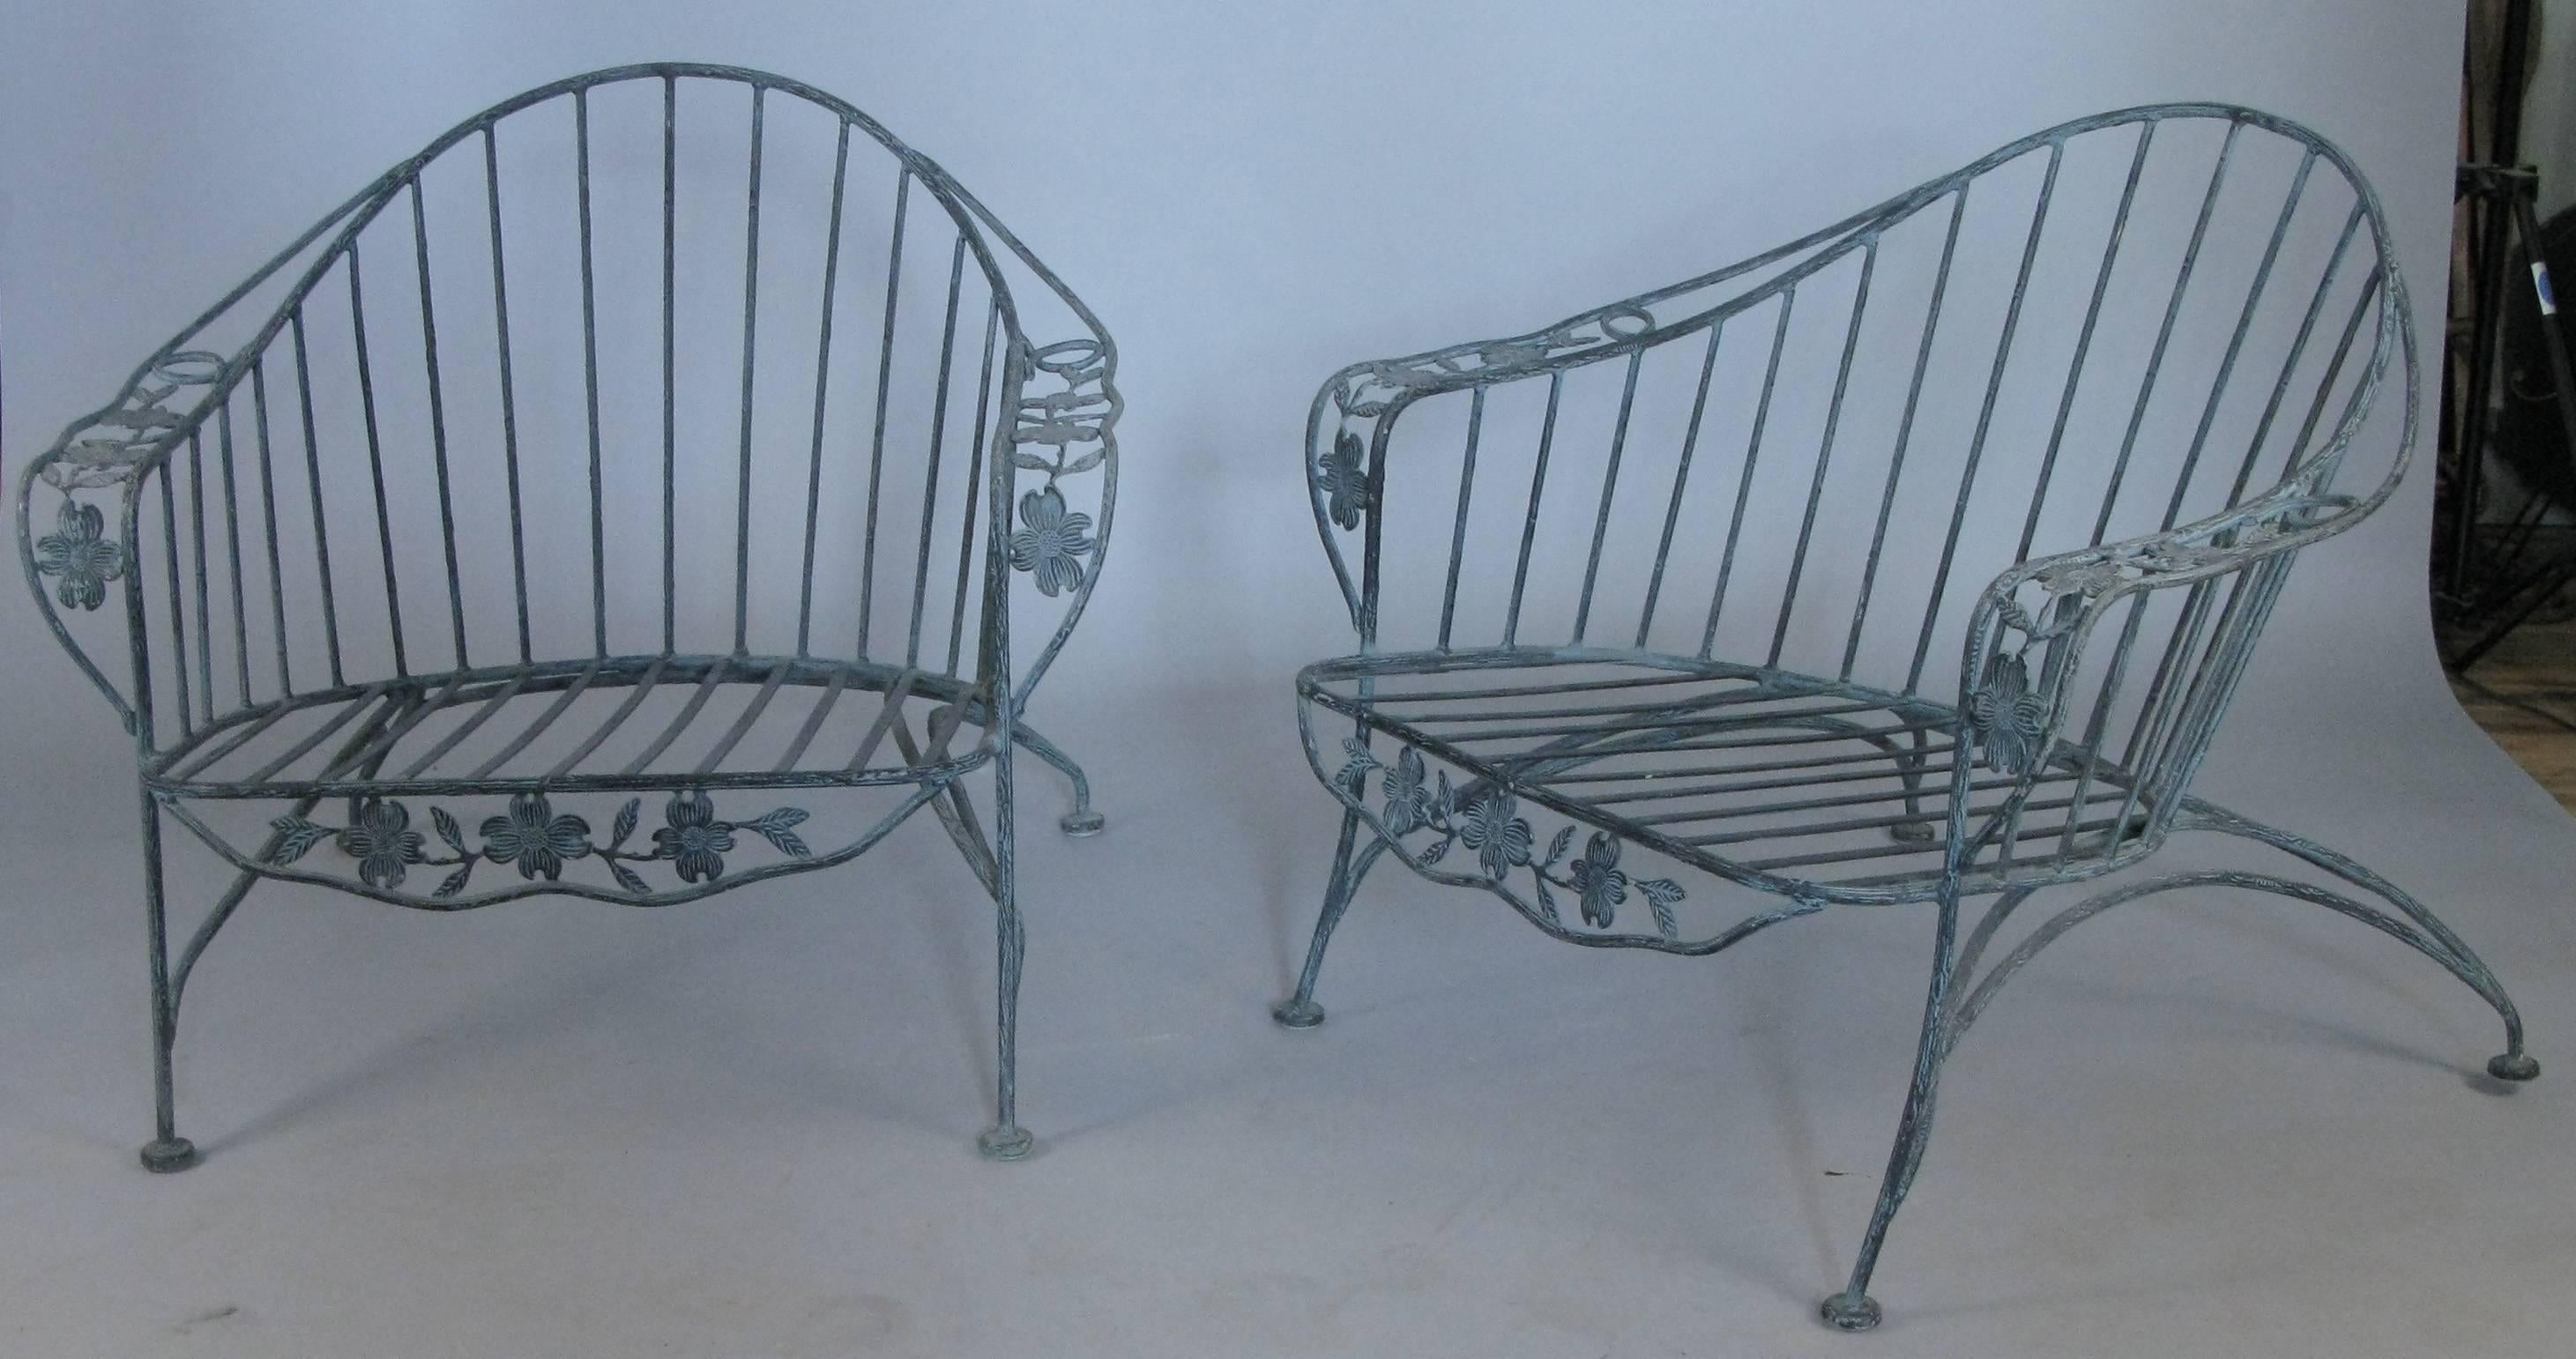 a very charming set of wrought iron lounge seating by Meadowcraft, consisting of a pair of large lounge chairs and a three-seat sofa, all with frames having a faux bois pattern and vines and leaves in the arms and under the skirt. Very well-made and